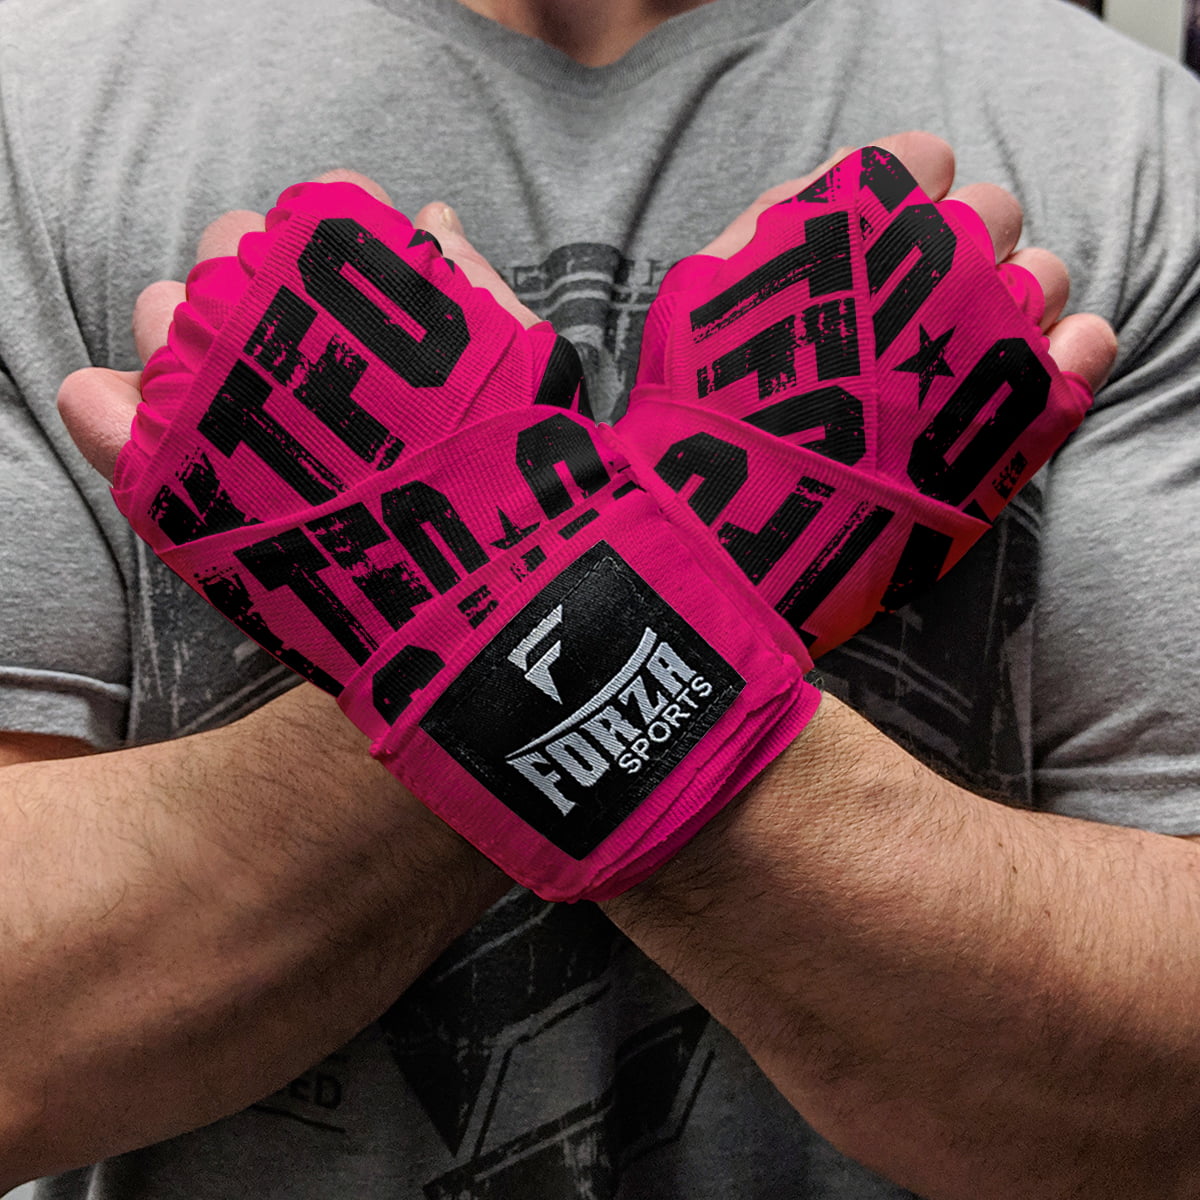 Forza Sports 180" Mexican Style Boxing and MMA Handwraps KTFO Hot Pink 